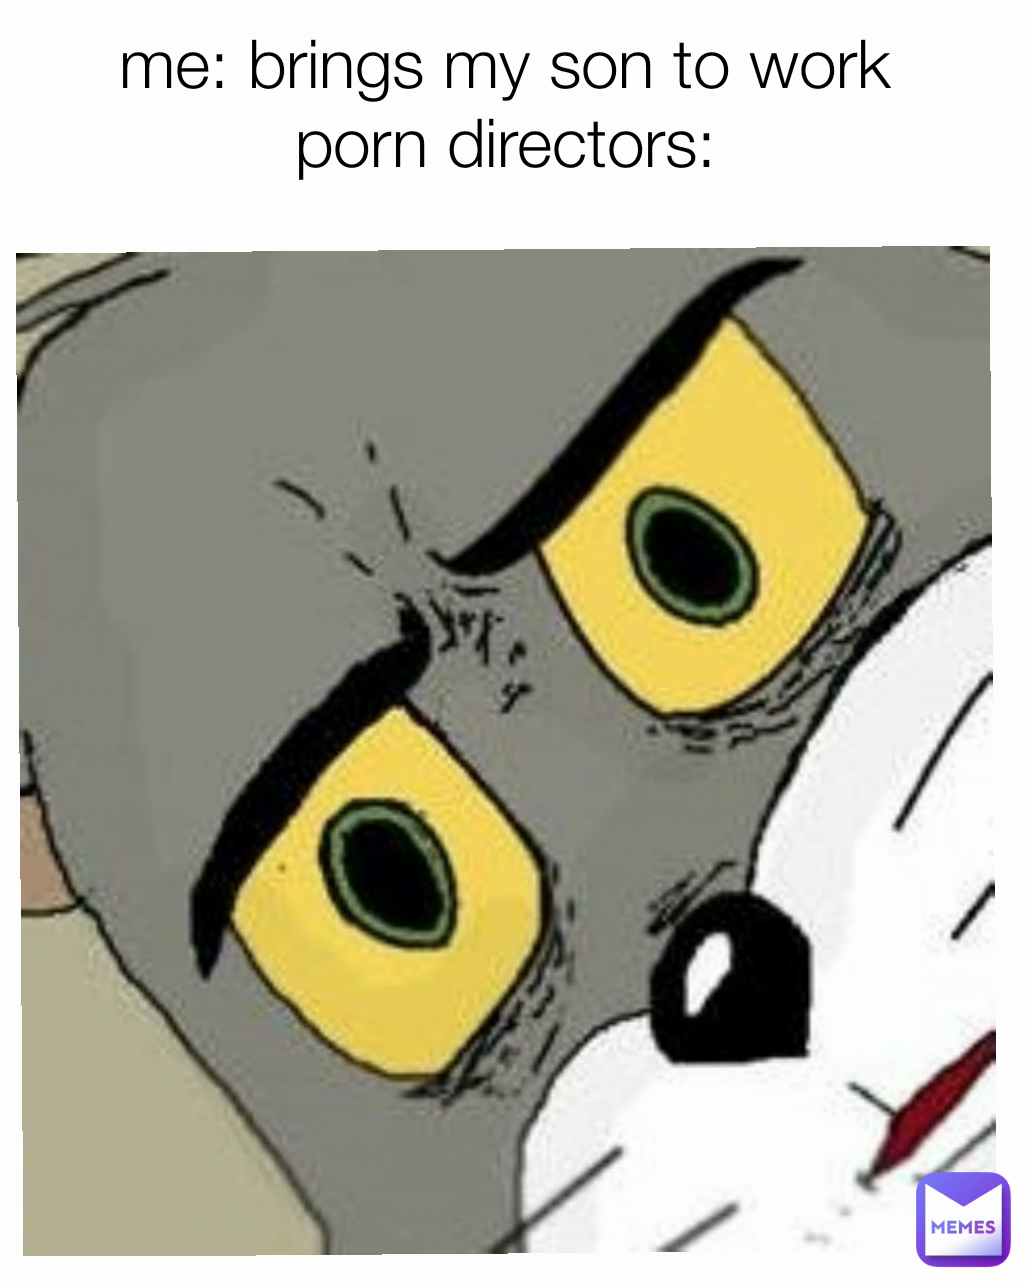 me: brings my son to work
porn directors:
